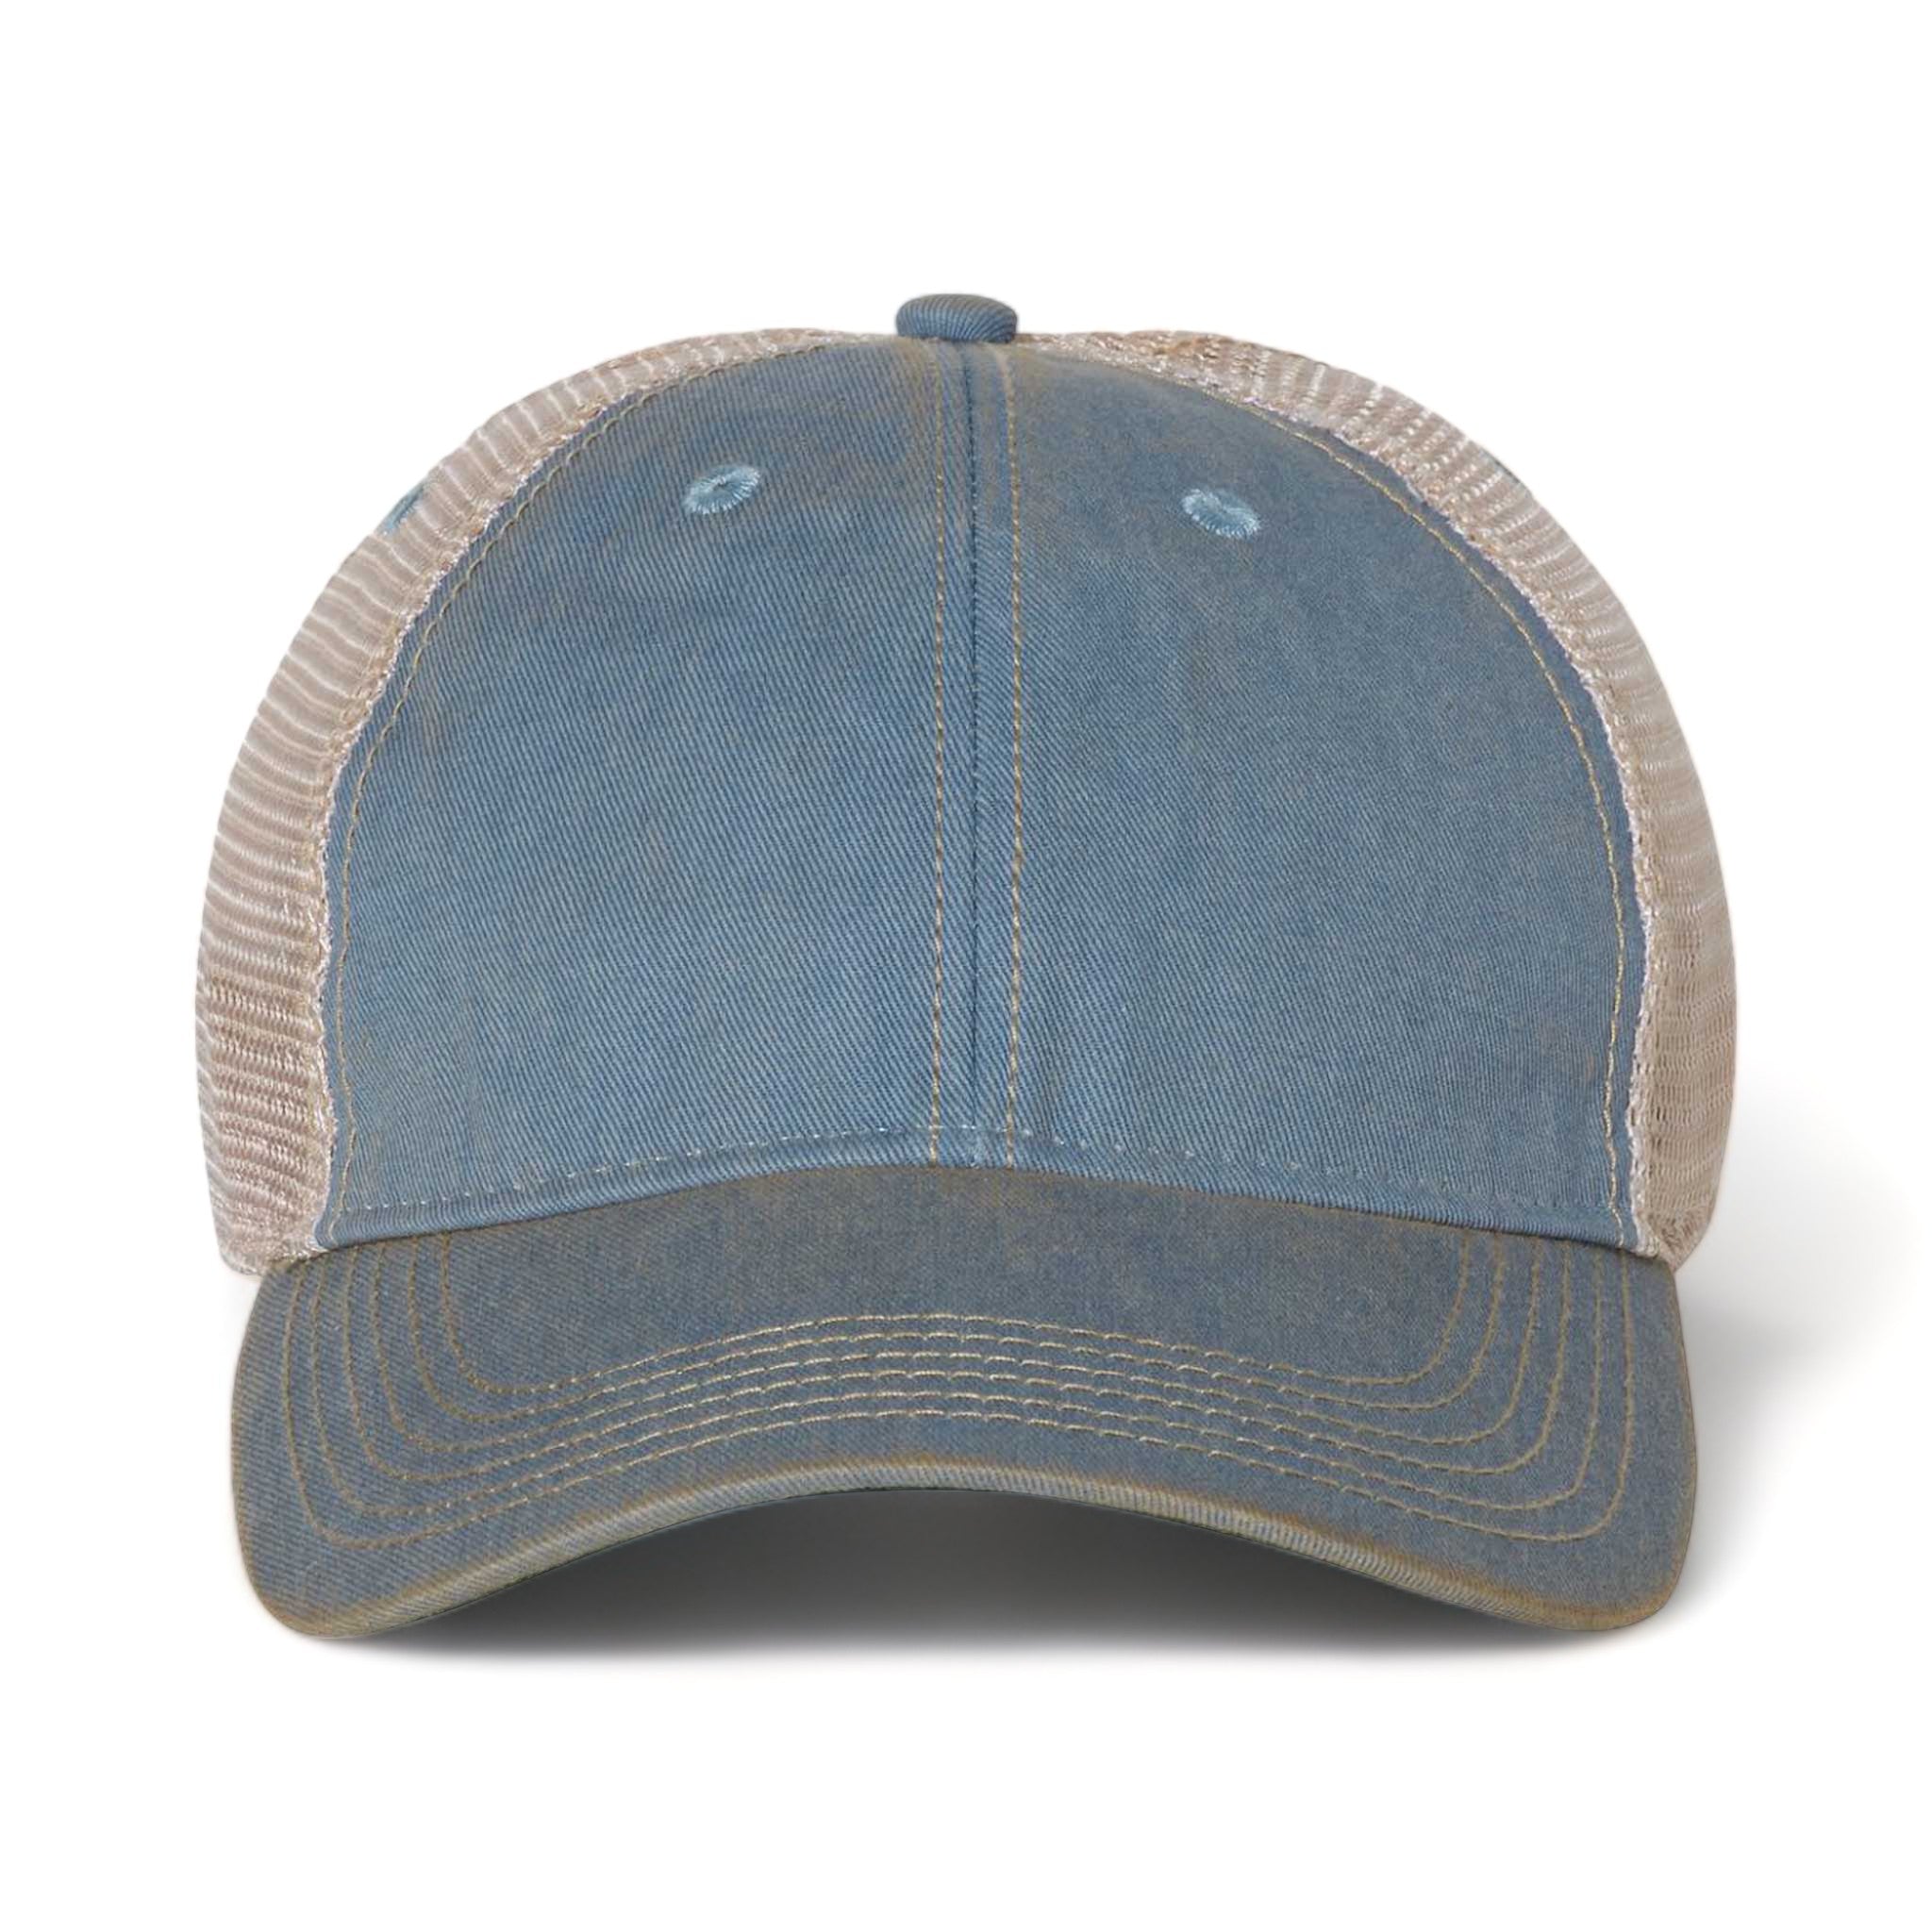 Front view of LEGACY OFA custom hat in light blue and khaki